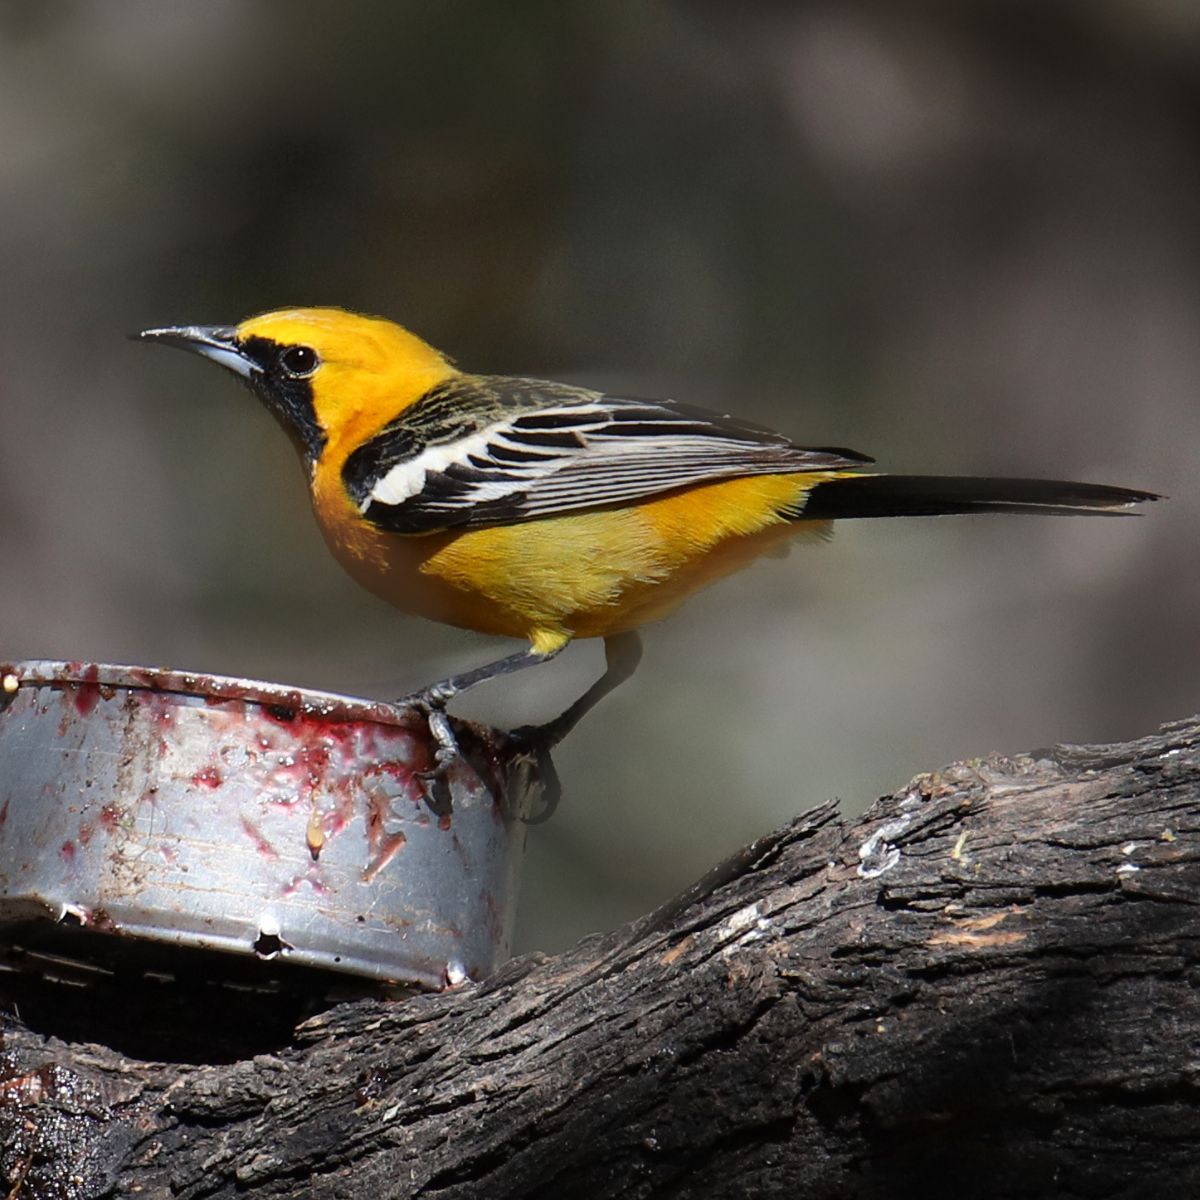 hooded oriole sitting on a jelly tin.